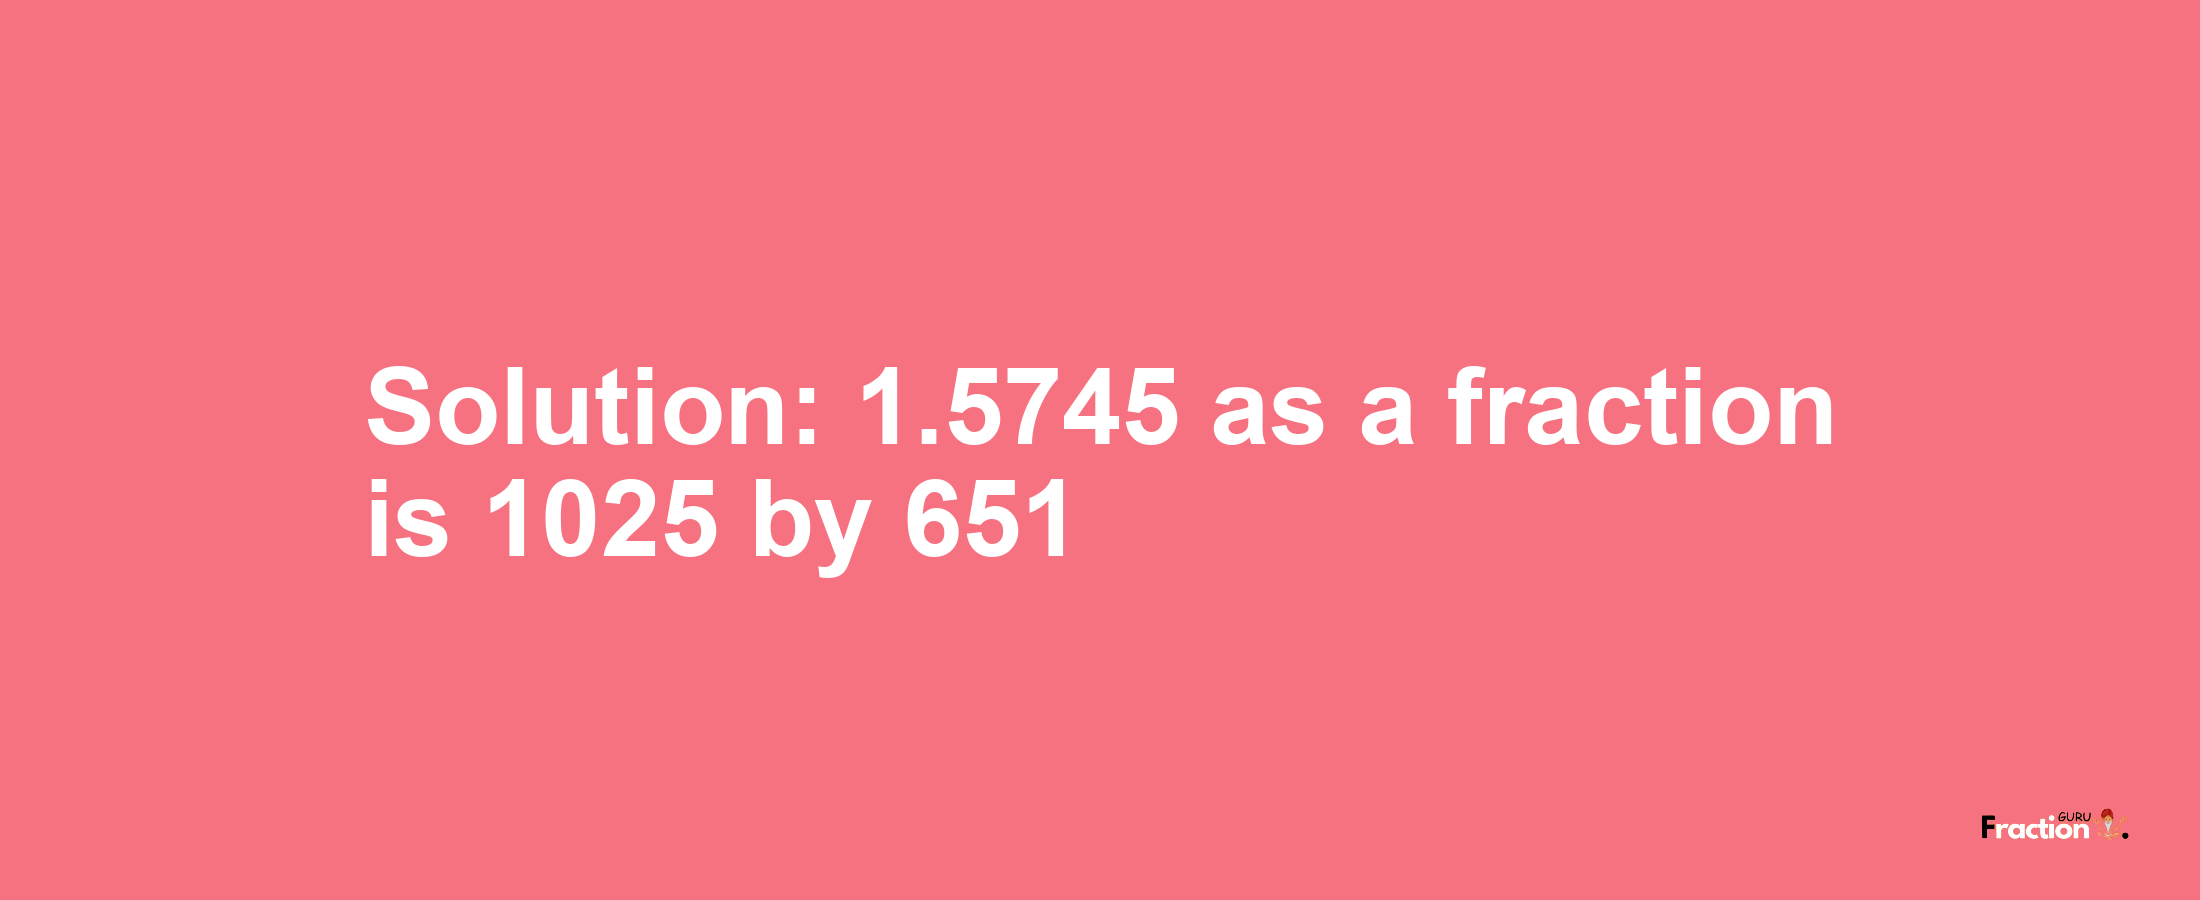 Solution:1.5745 as a fraction is 1025/651